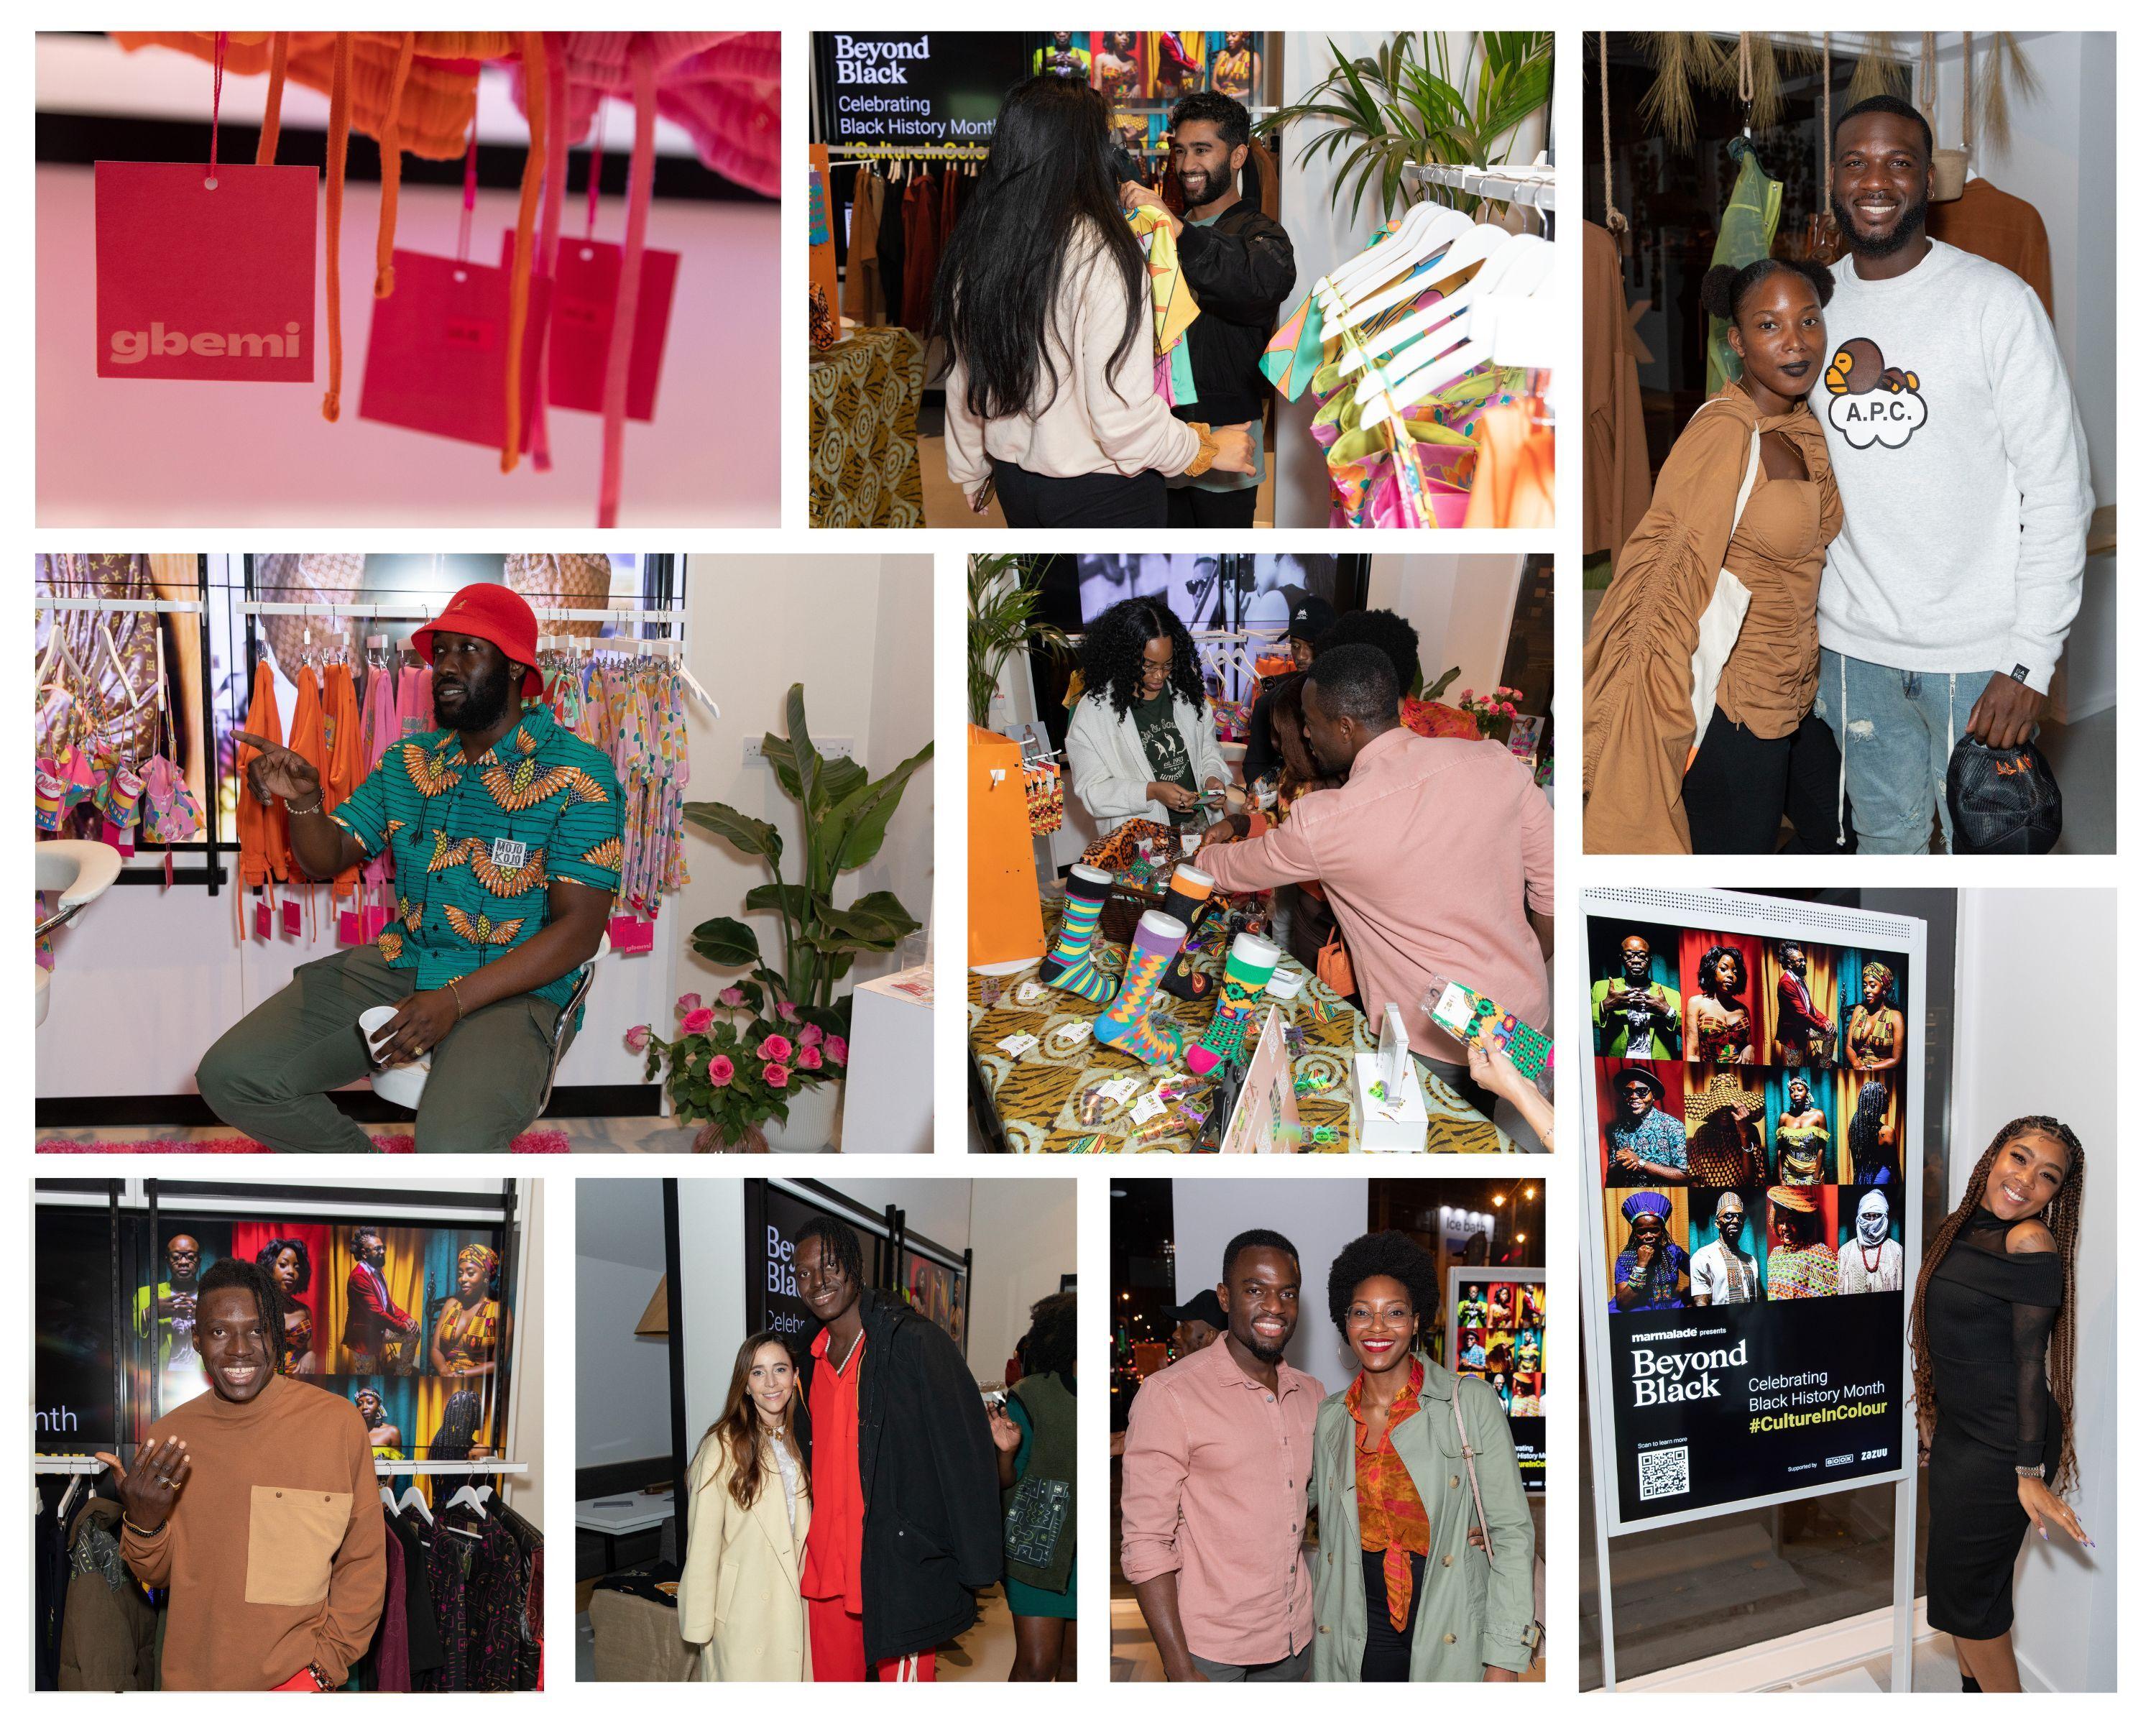 Black History Month pop-up event at Soo Shoreditch